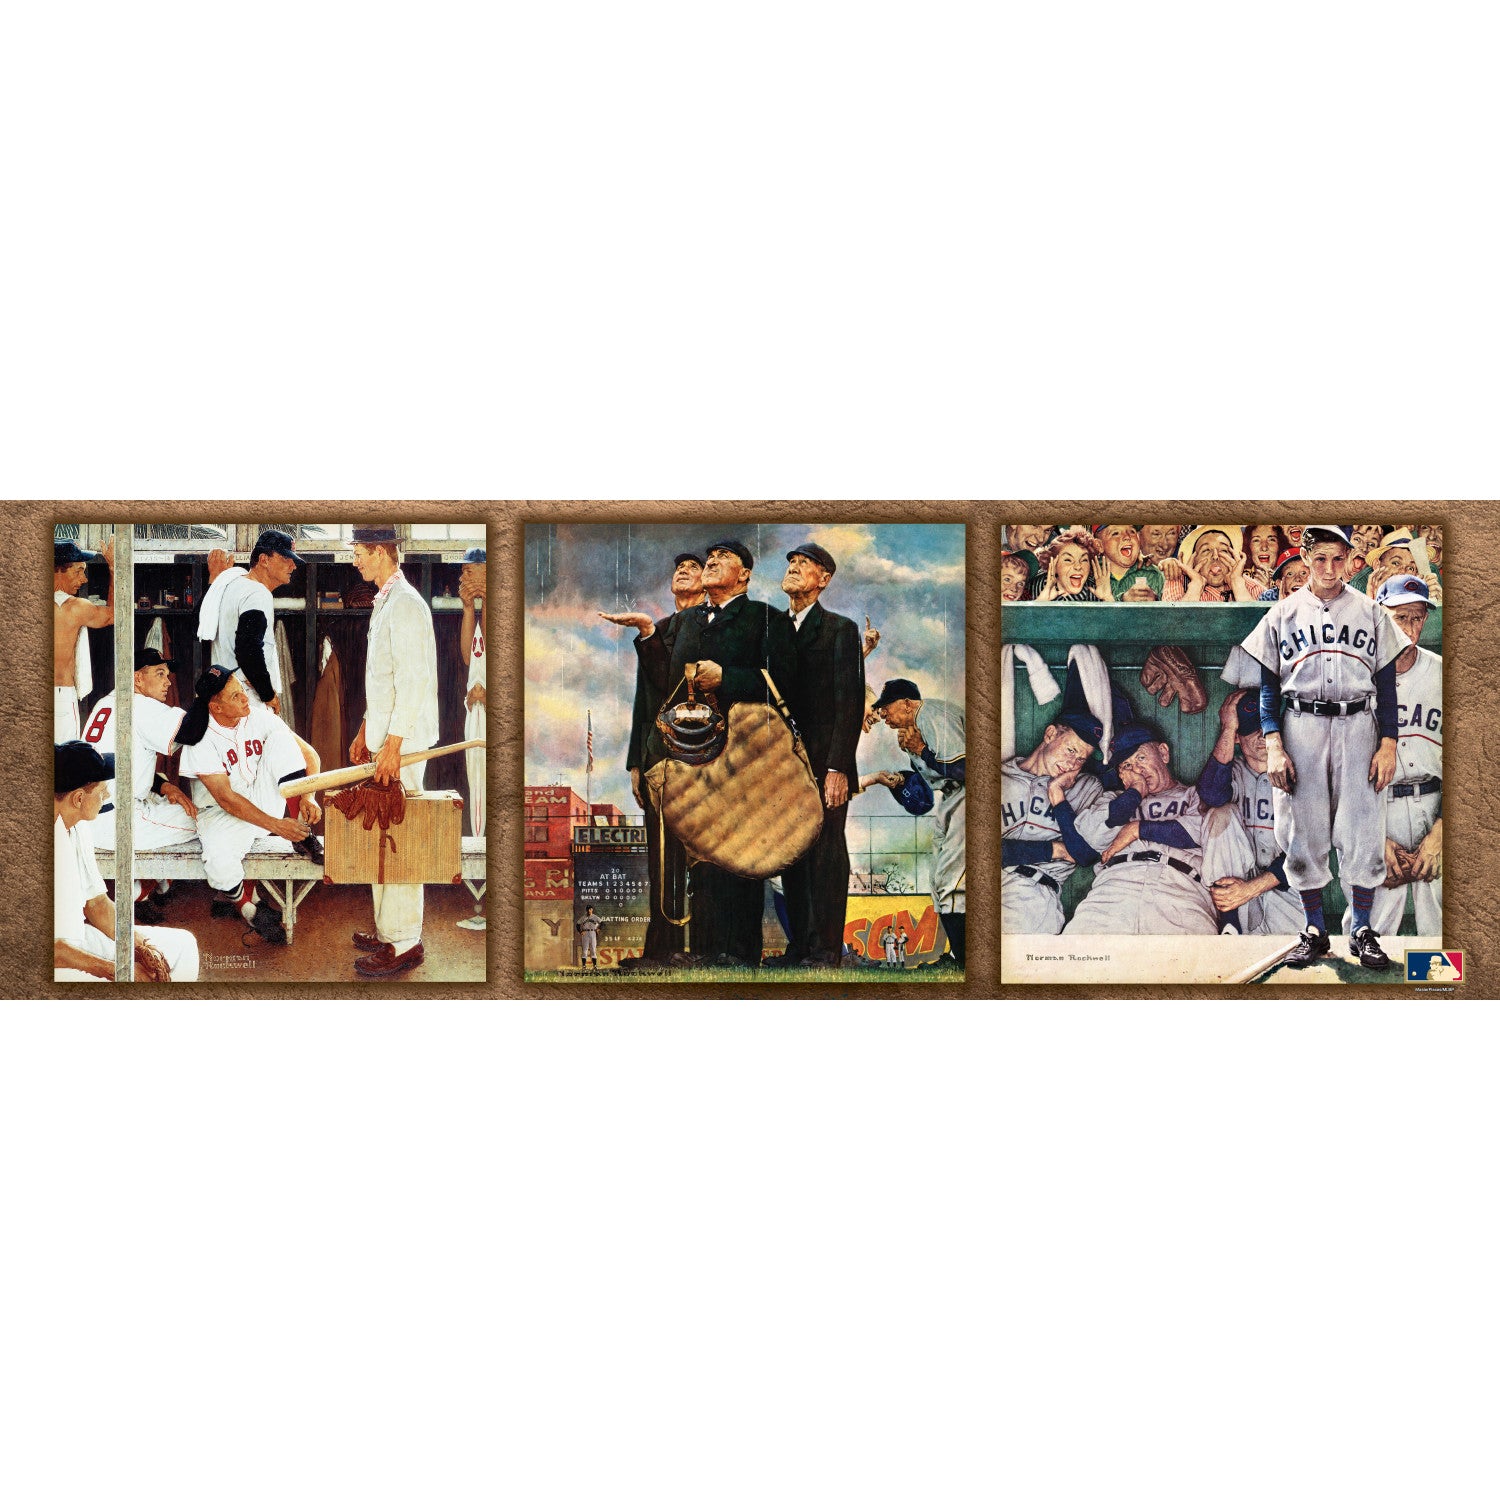 Norman Rockwell - SEP Baseball 1000pc Panoramic Puzzle